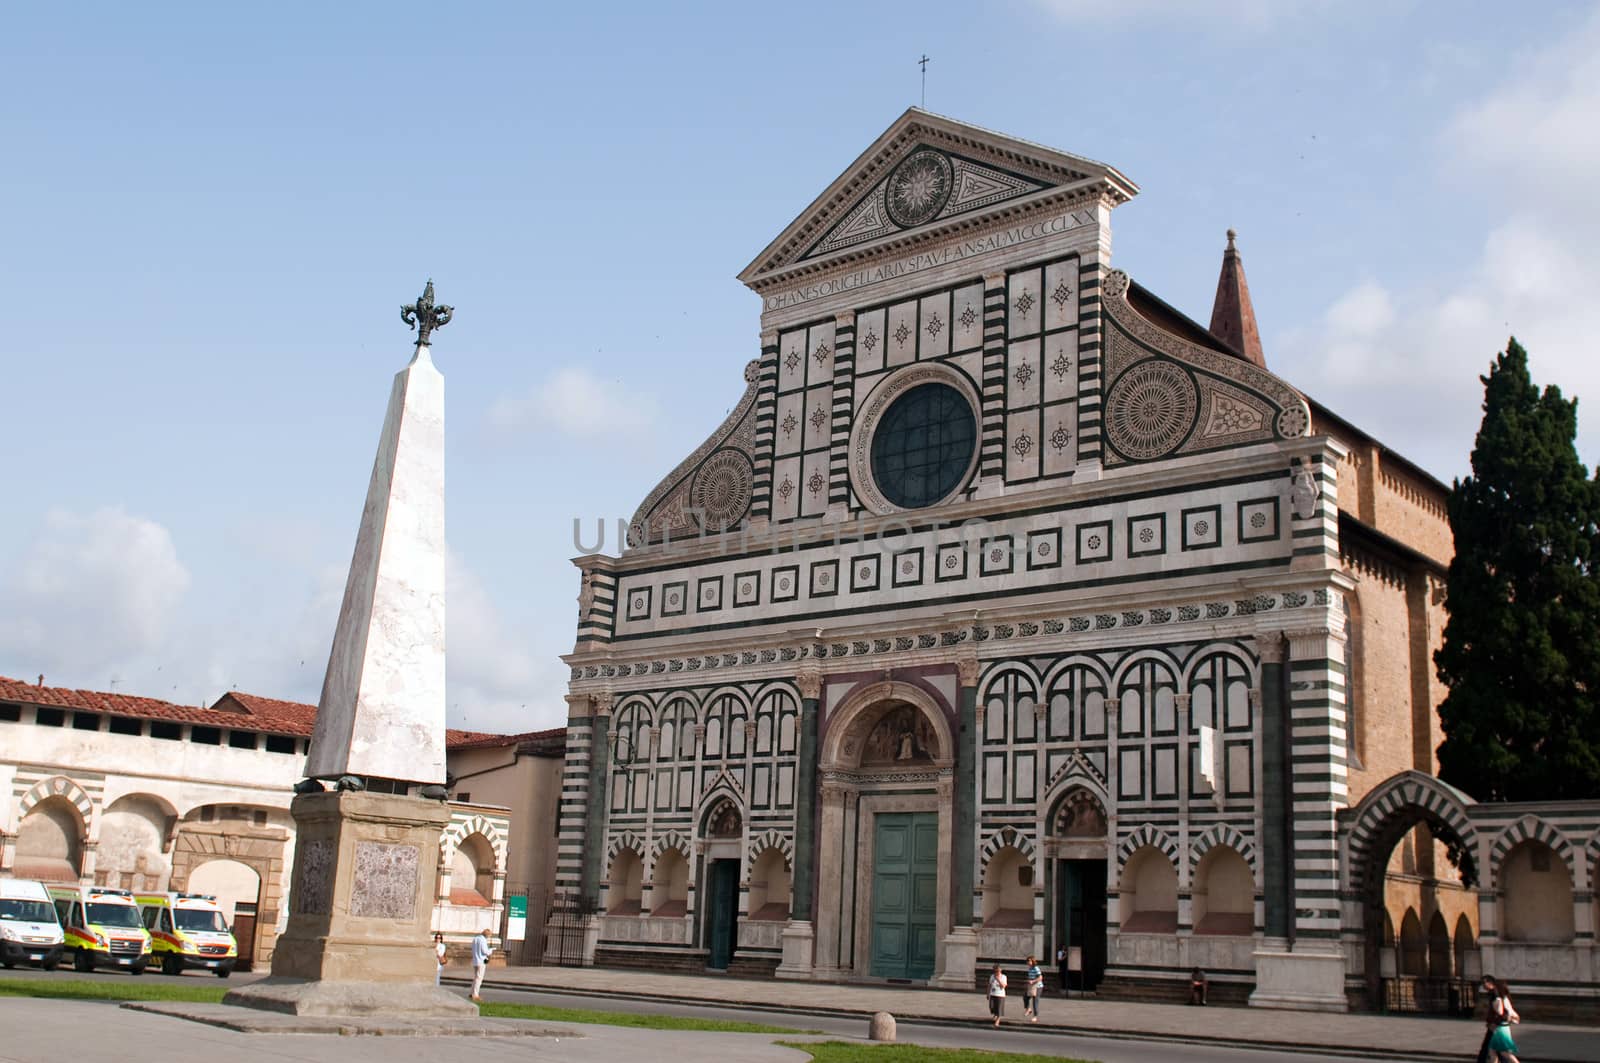 The facade of Santa Maria Novella, completed by Leon Battista Alberti in 1470 in Florence, Tuscany, Italy. by lexan